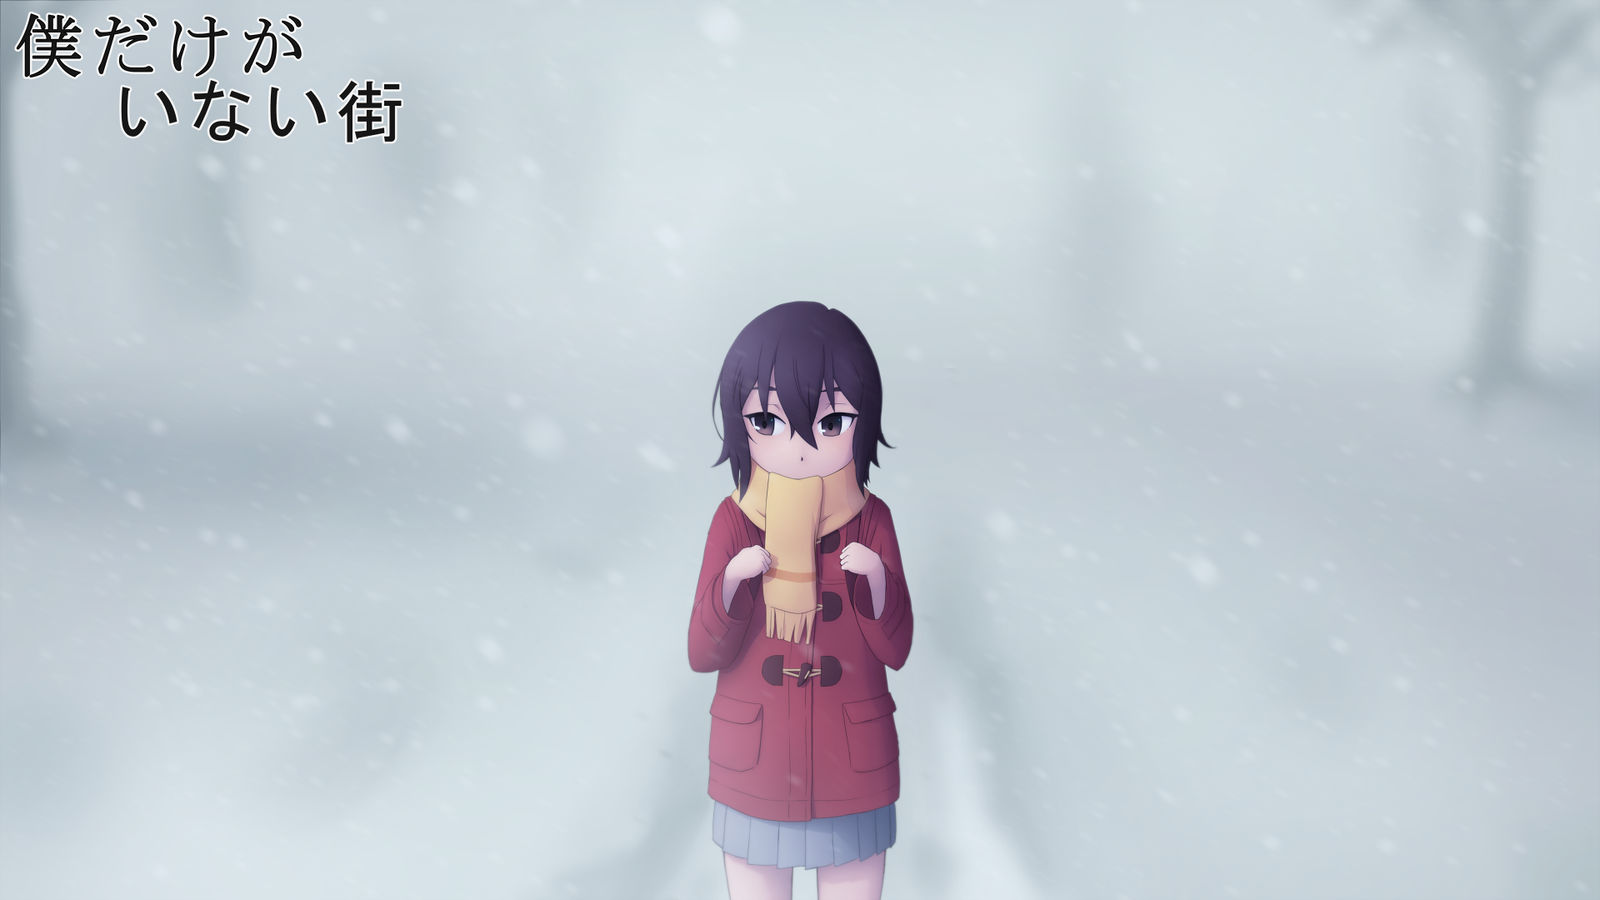 Kayo In A Snowstorm Wallpaper Edition By Canavaro100 On Deviantart